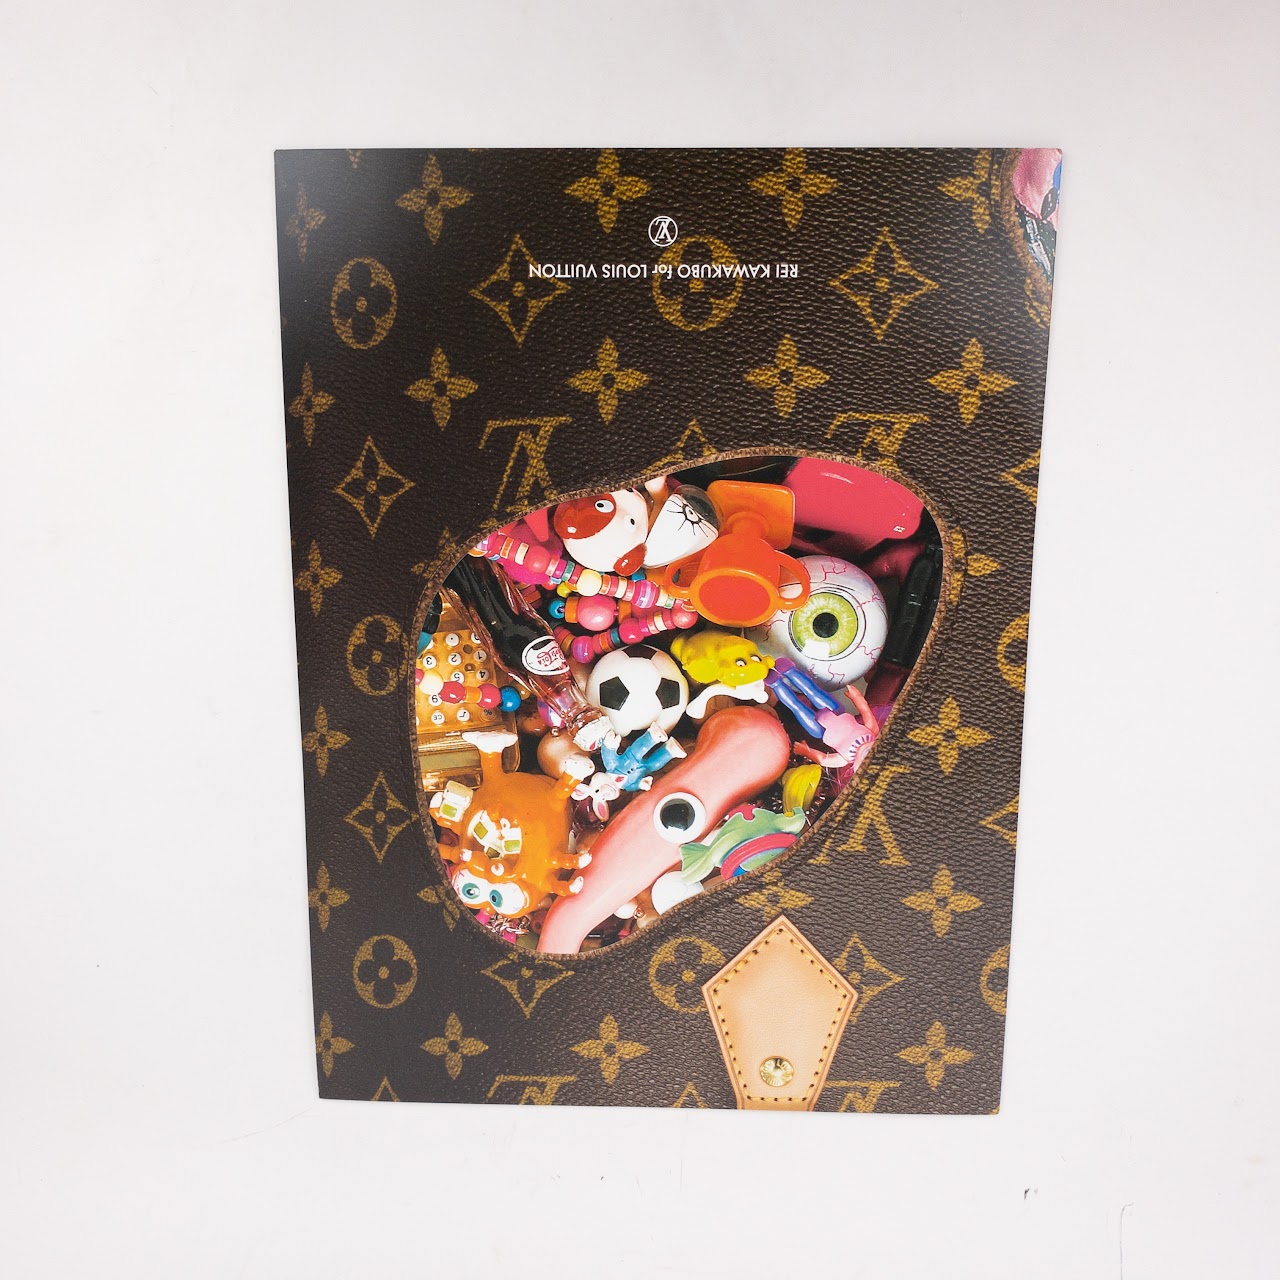 mar on X: Louis Vuitton's Celebrating Monogram collaboration with Rei  Kawakubo, Karl Lagerfeld, Frank Gehry, Cindy Sherman, Marc Newson, and  Christian Louboutin. LV invited the 6 iconic artists to re-interpret the LV